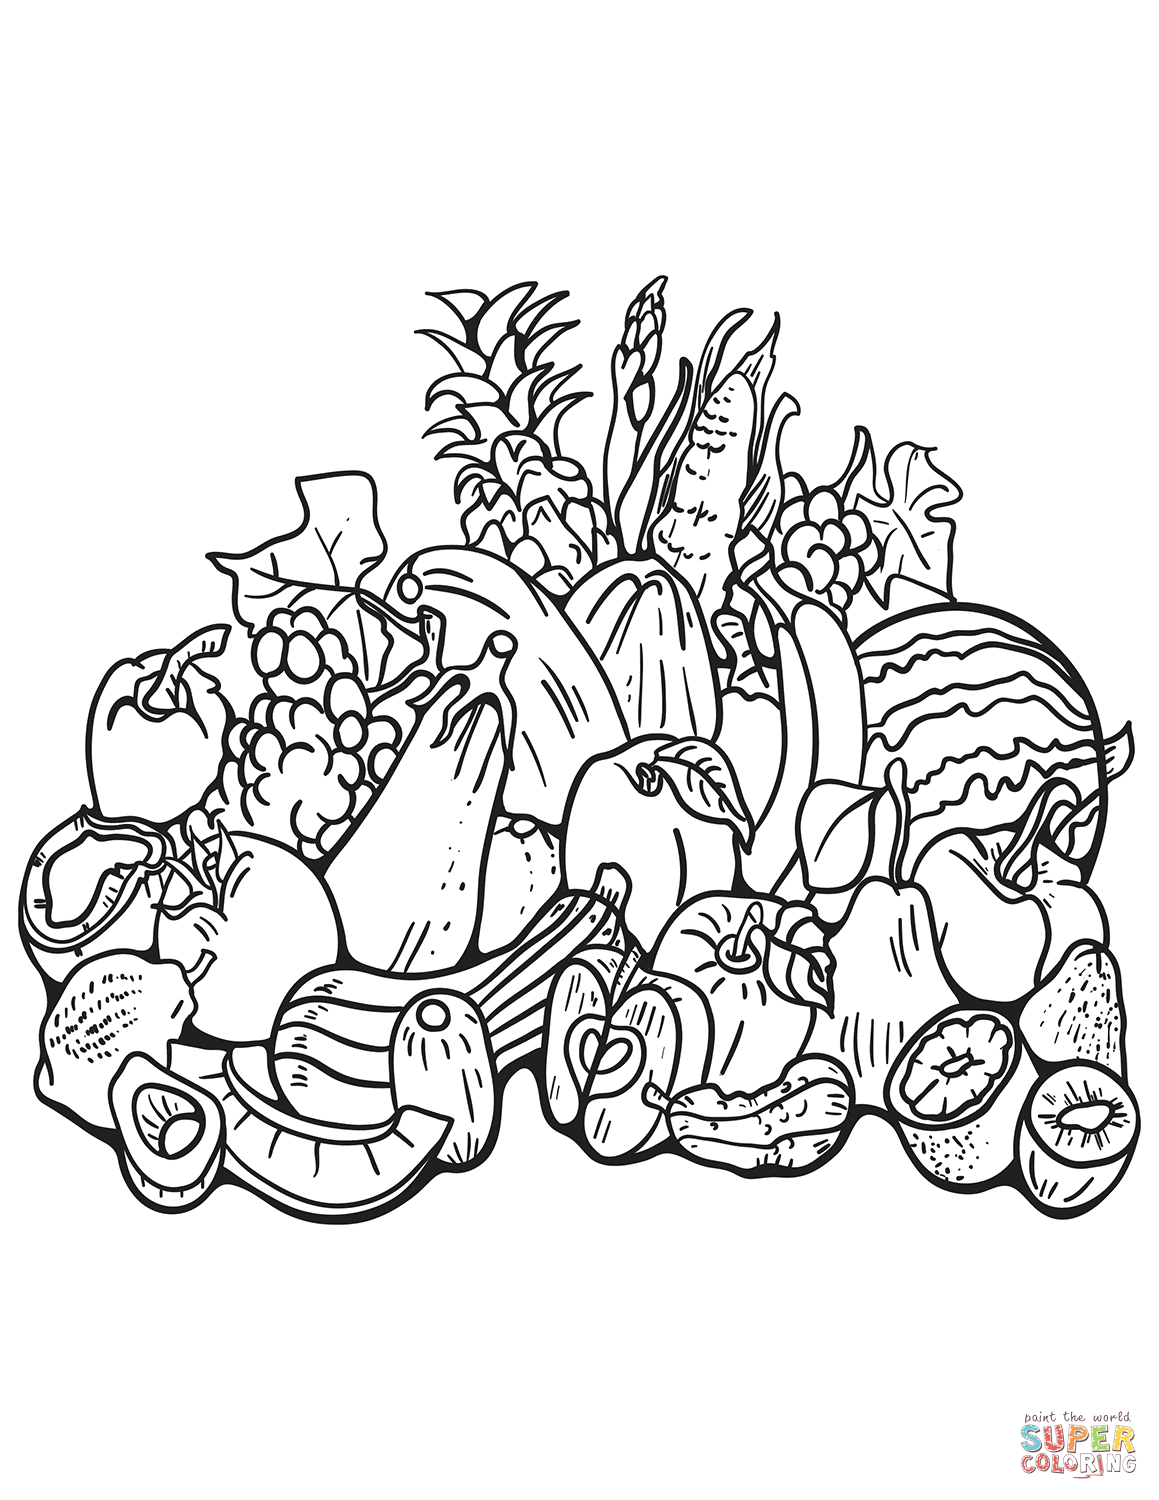 Fall Harvest Coloring Page | Free Printable Coloring Pages - Free Printable Fall Harvest Coloring Pages